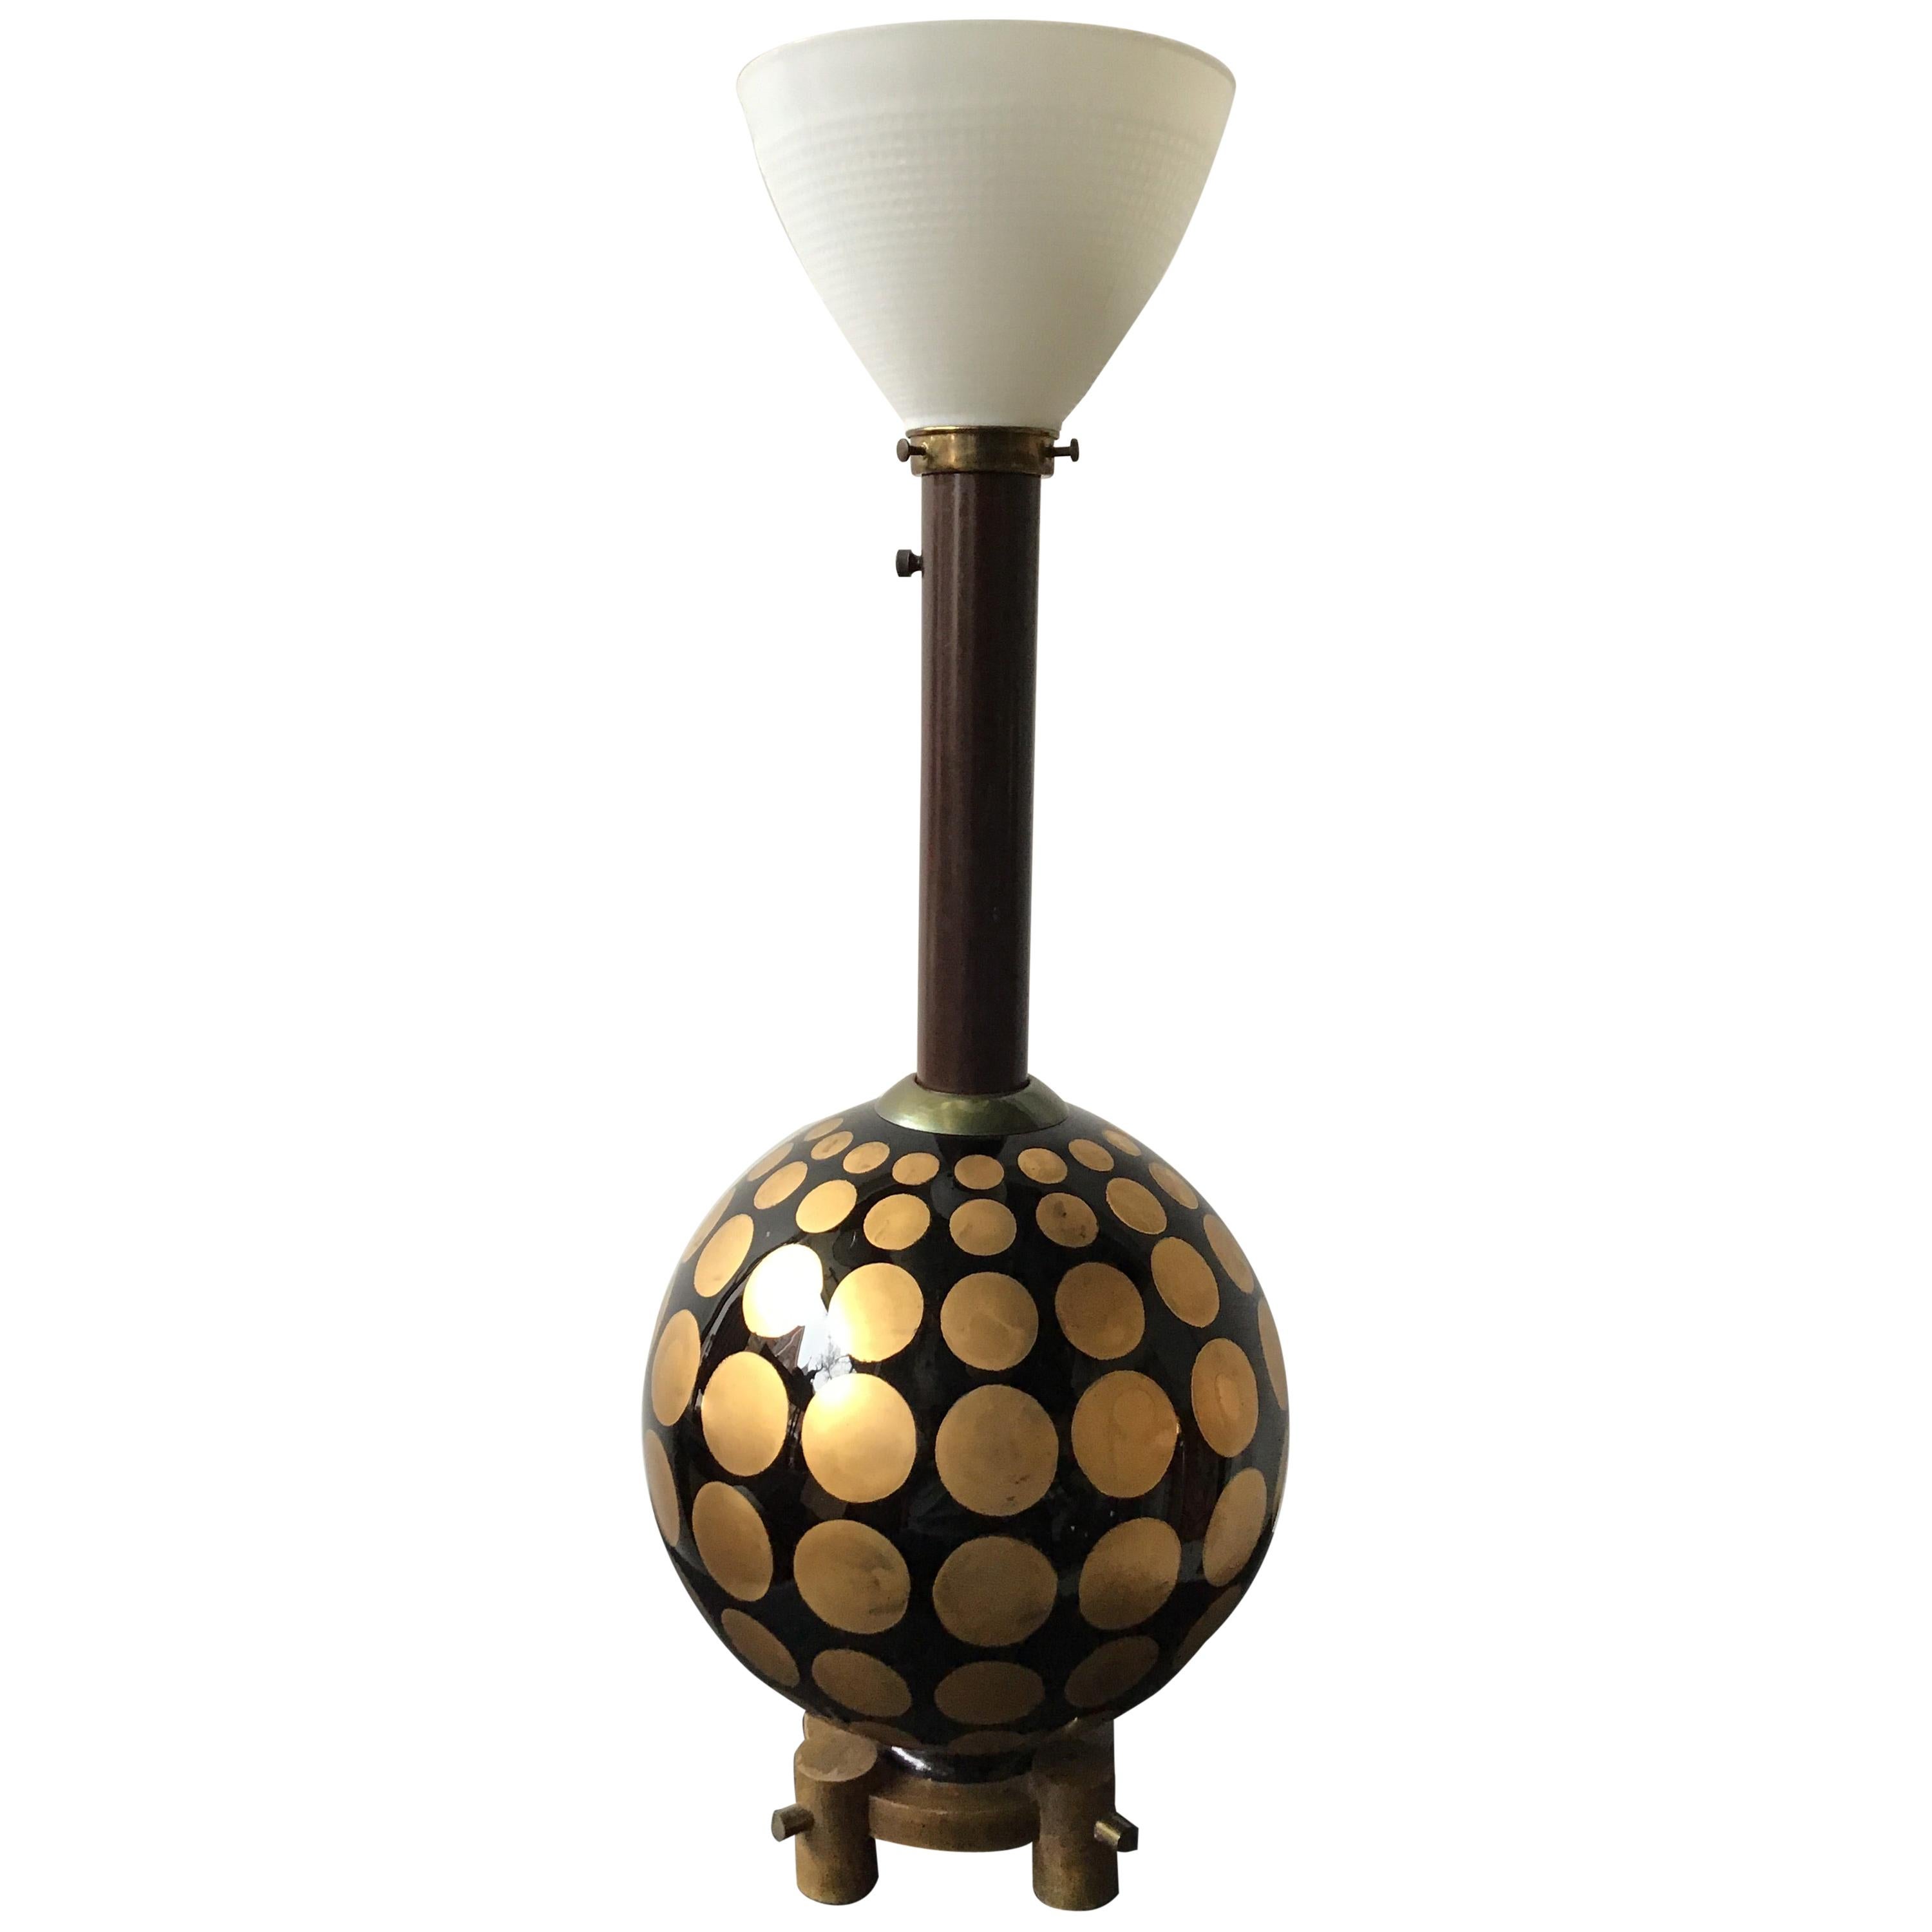 1950s Round Glass Lamp with Gold Painted Circles